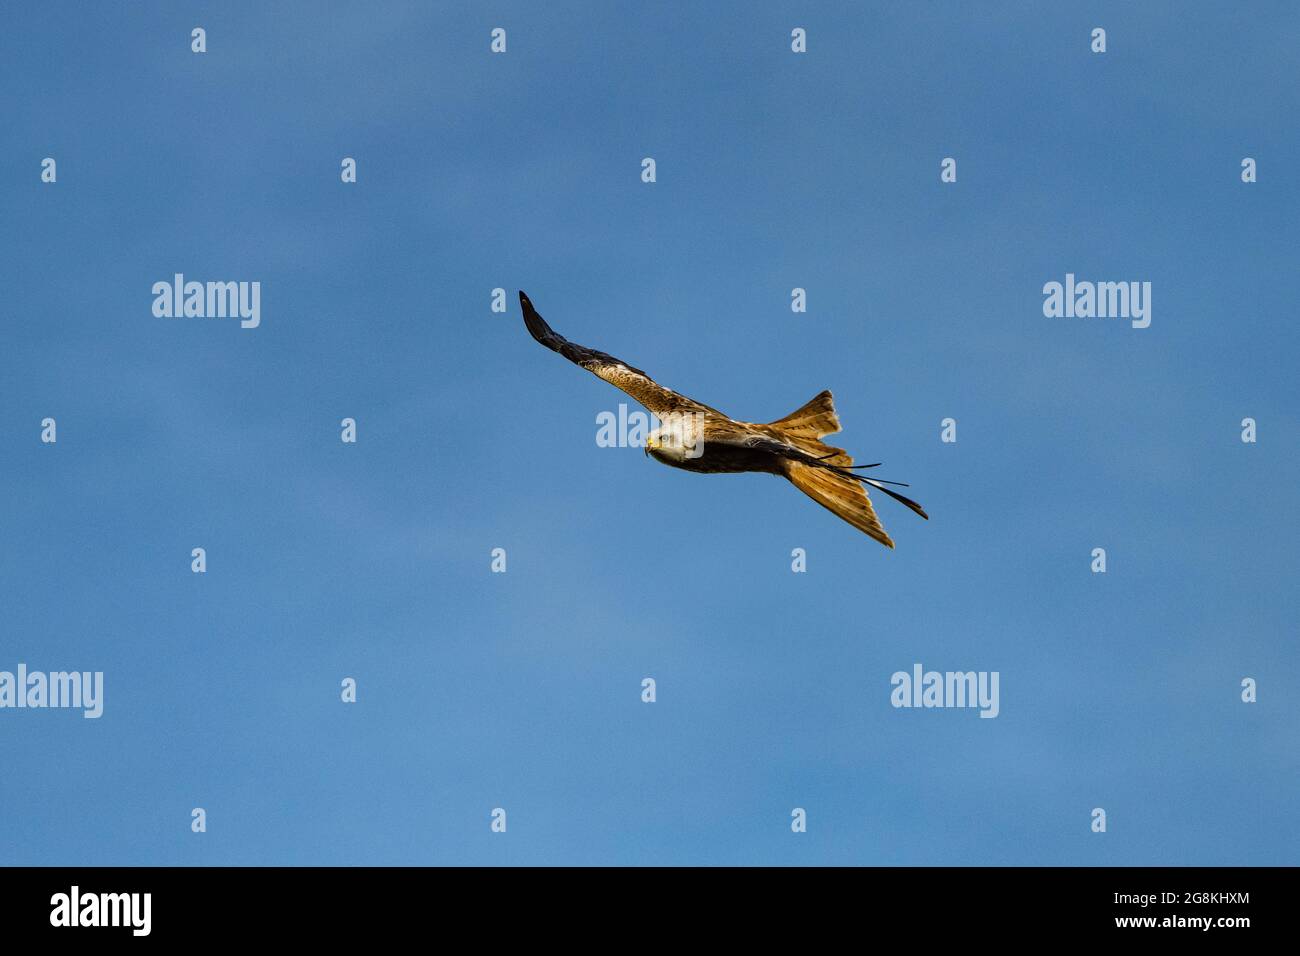 red kite caught in the sunlight soaring in blue skies Stock Photo